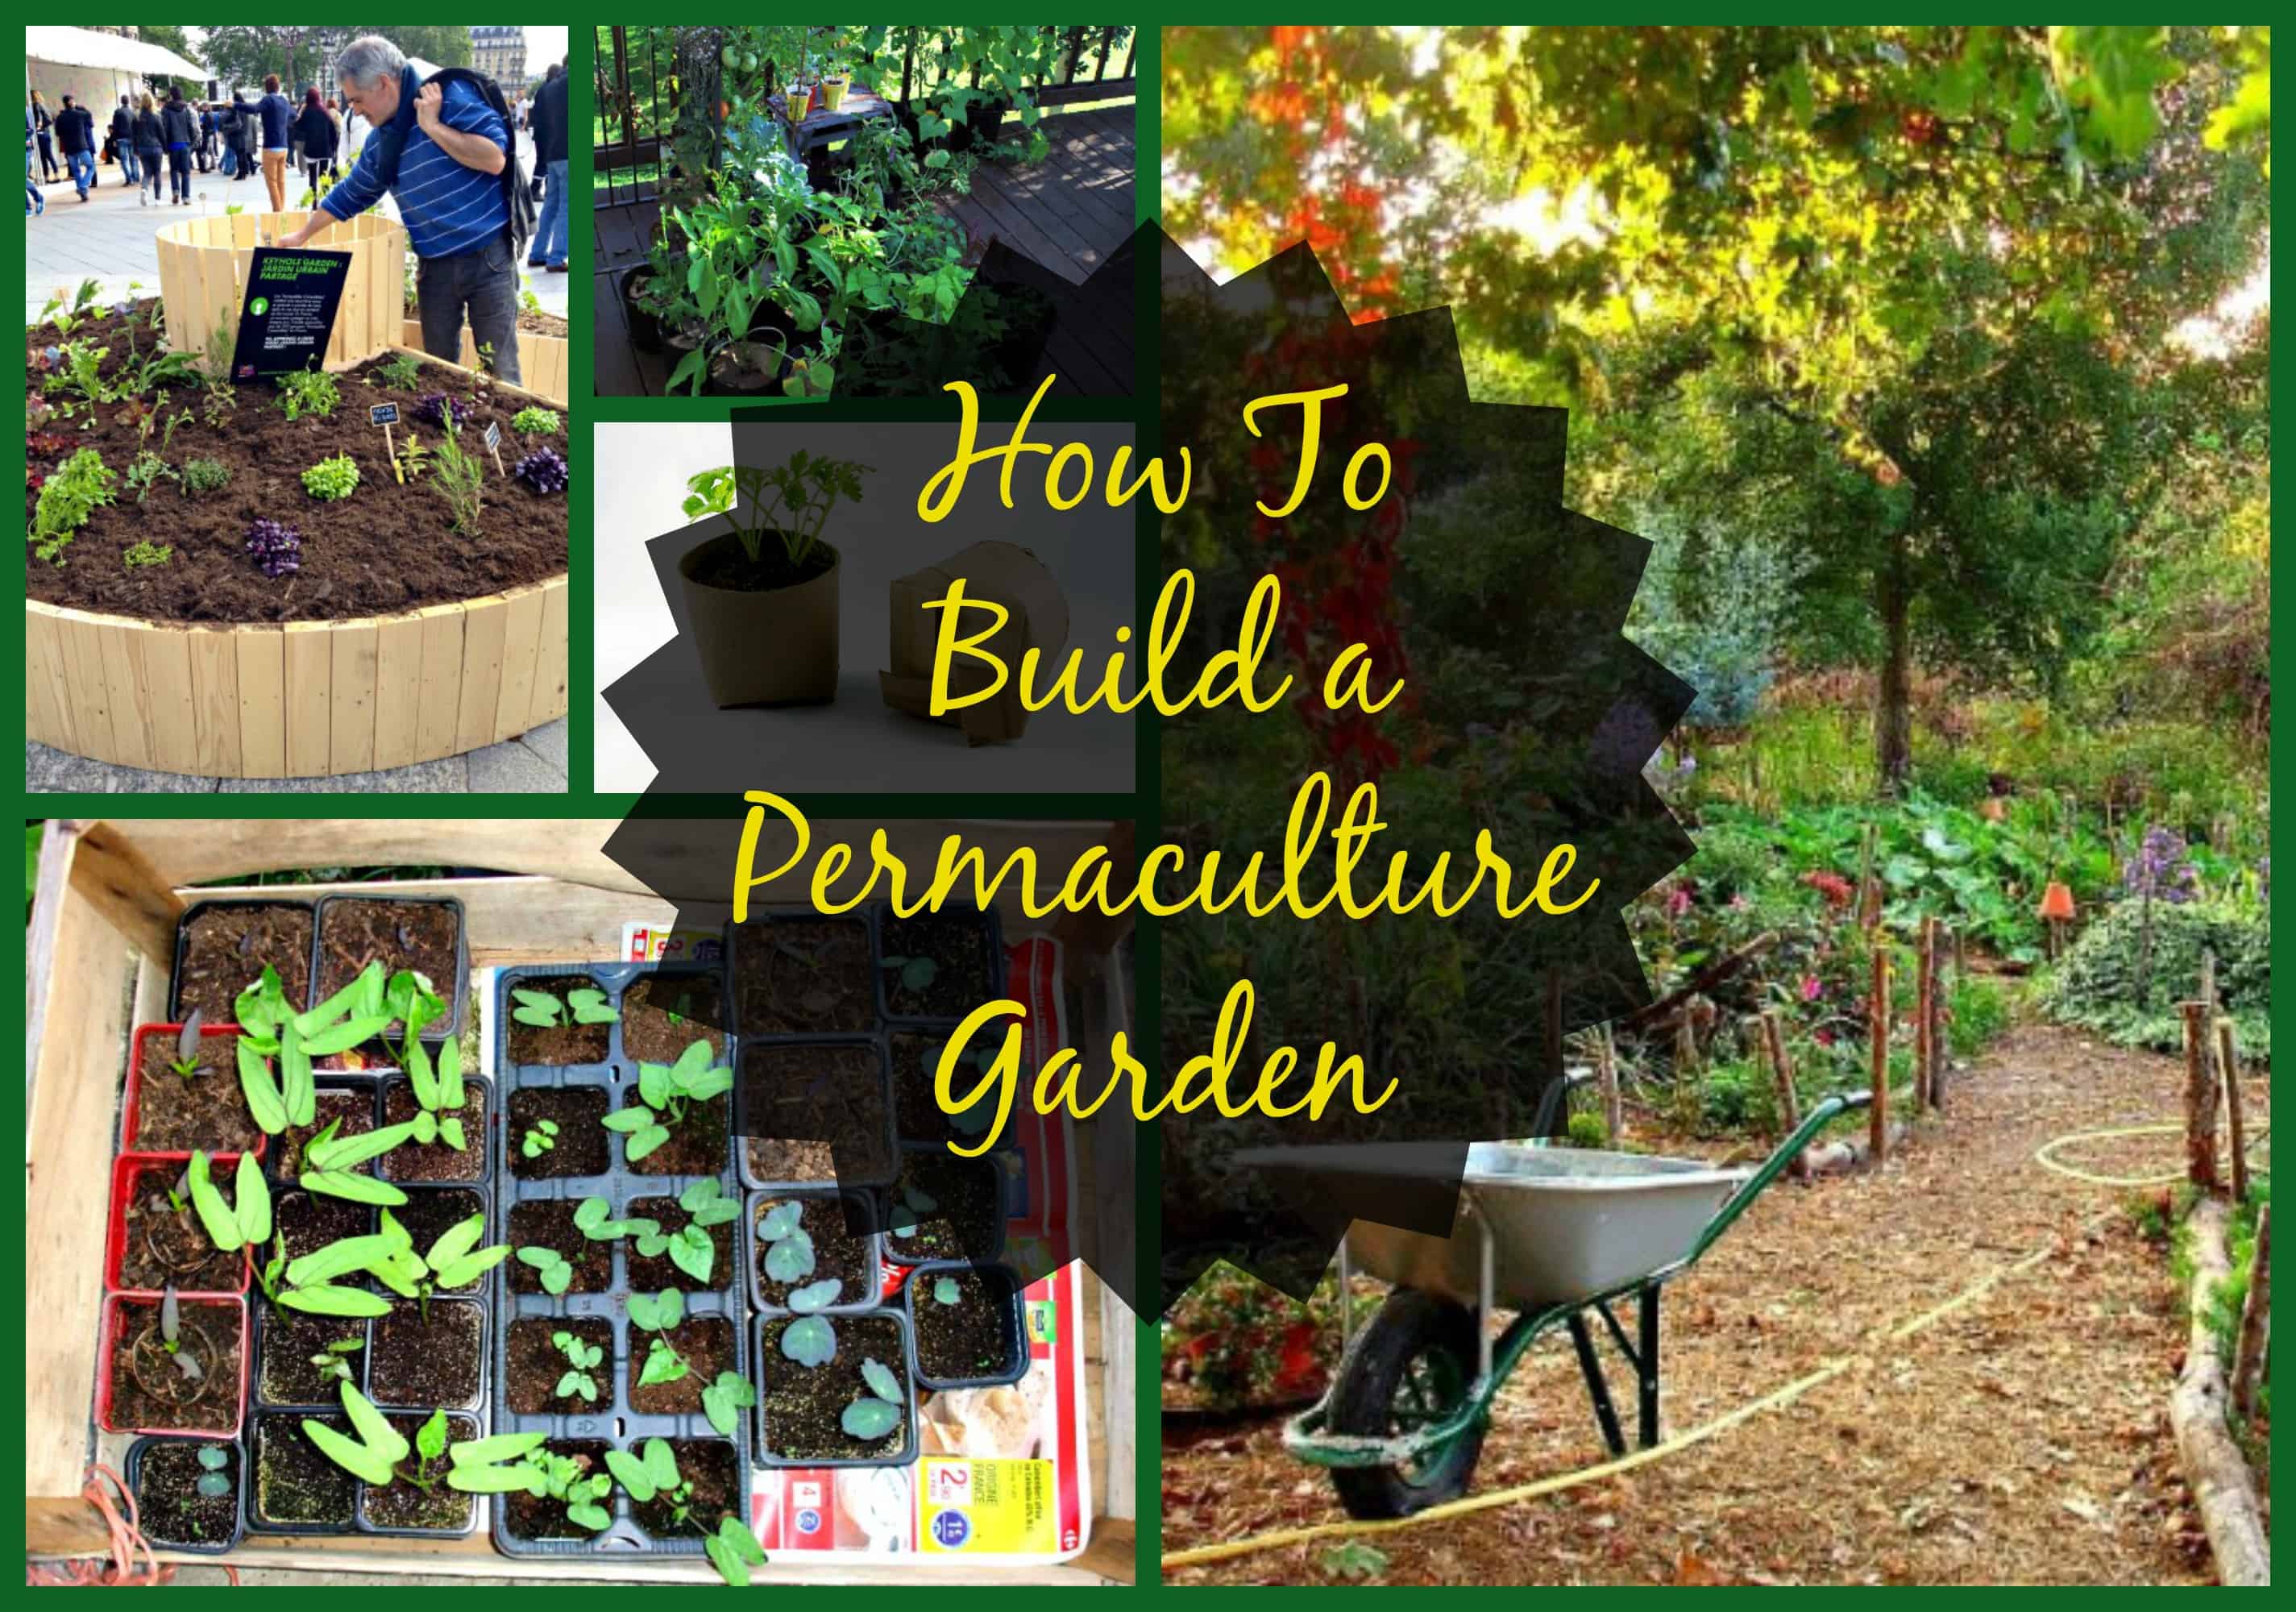 How to Build a Permaculture Garden